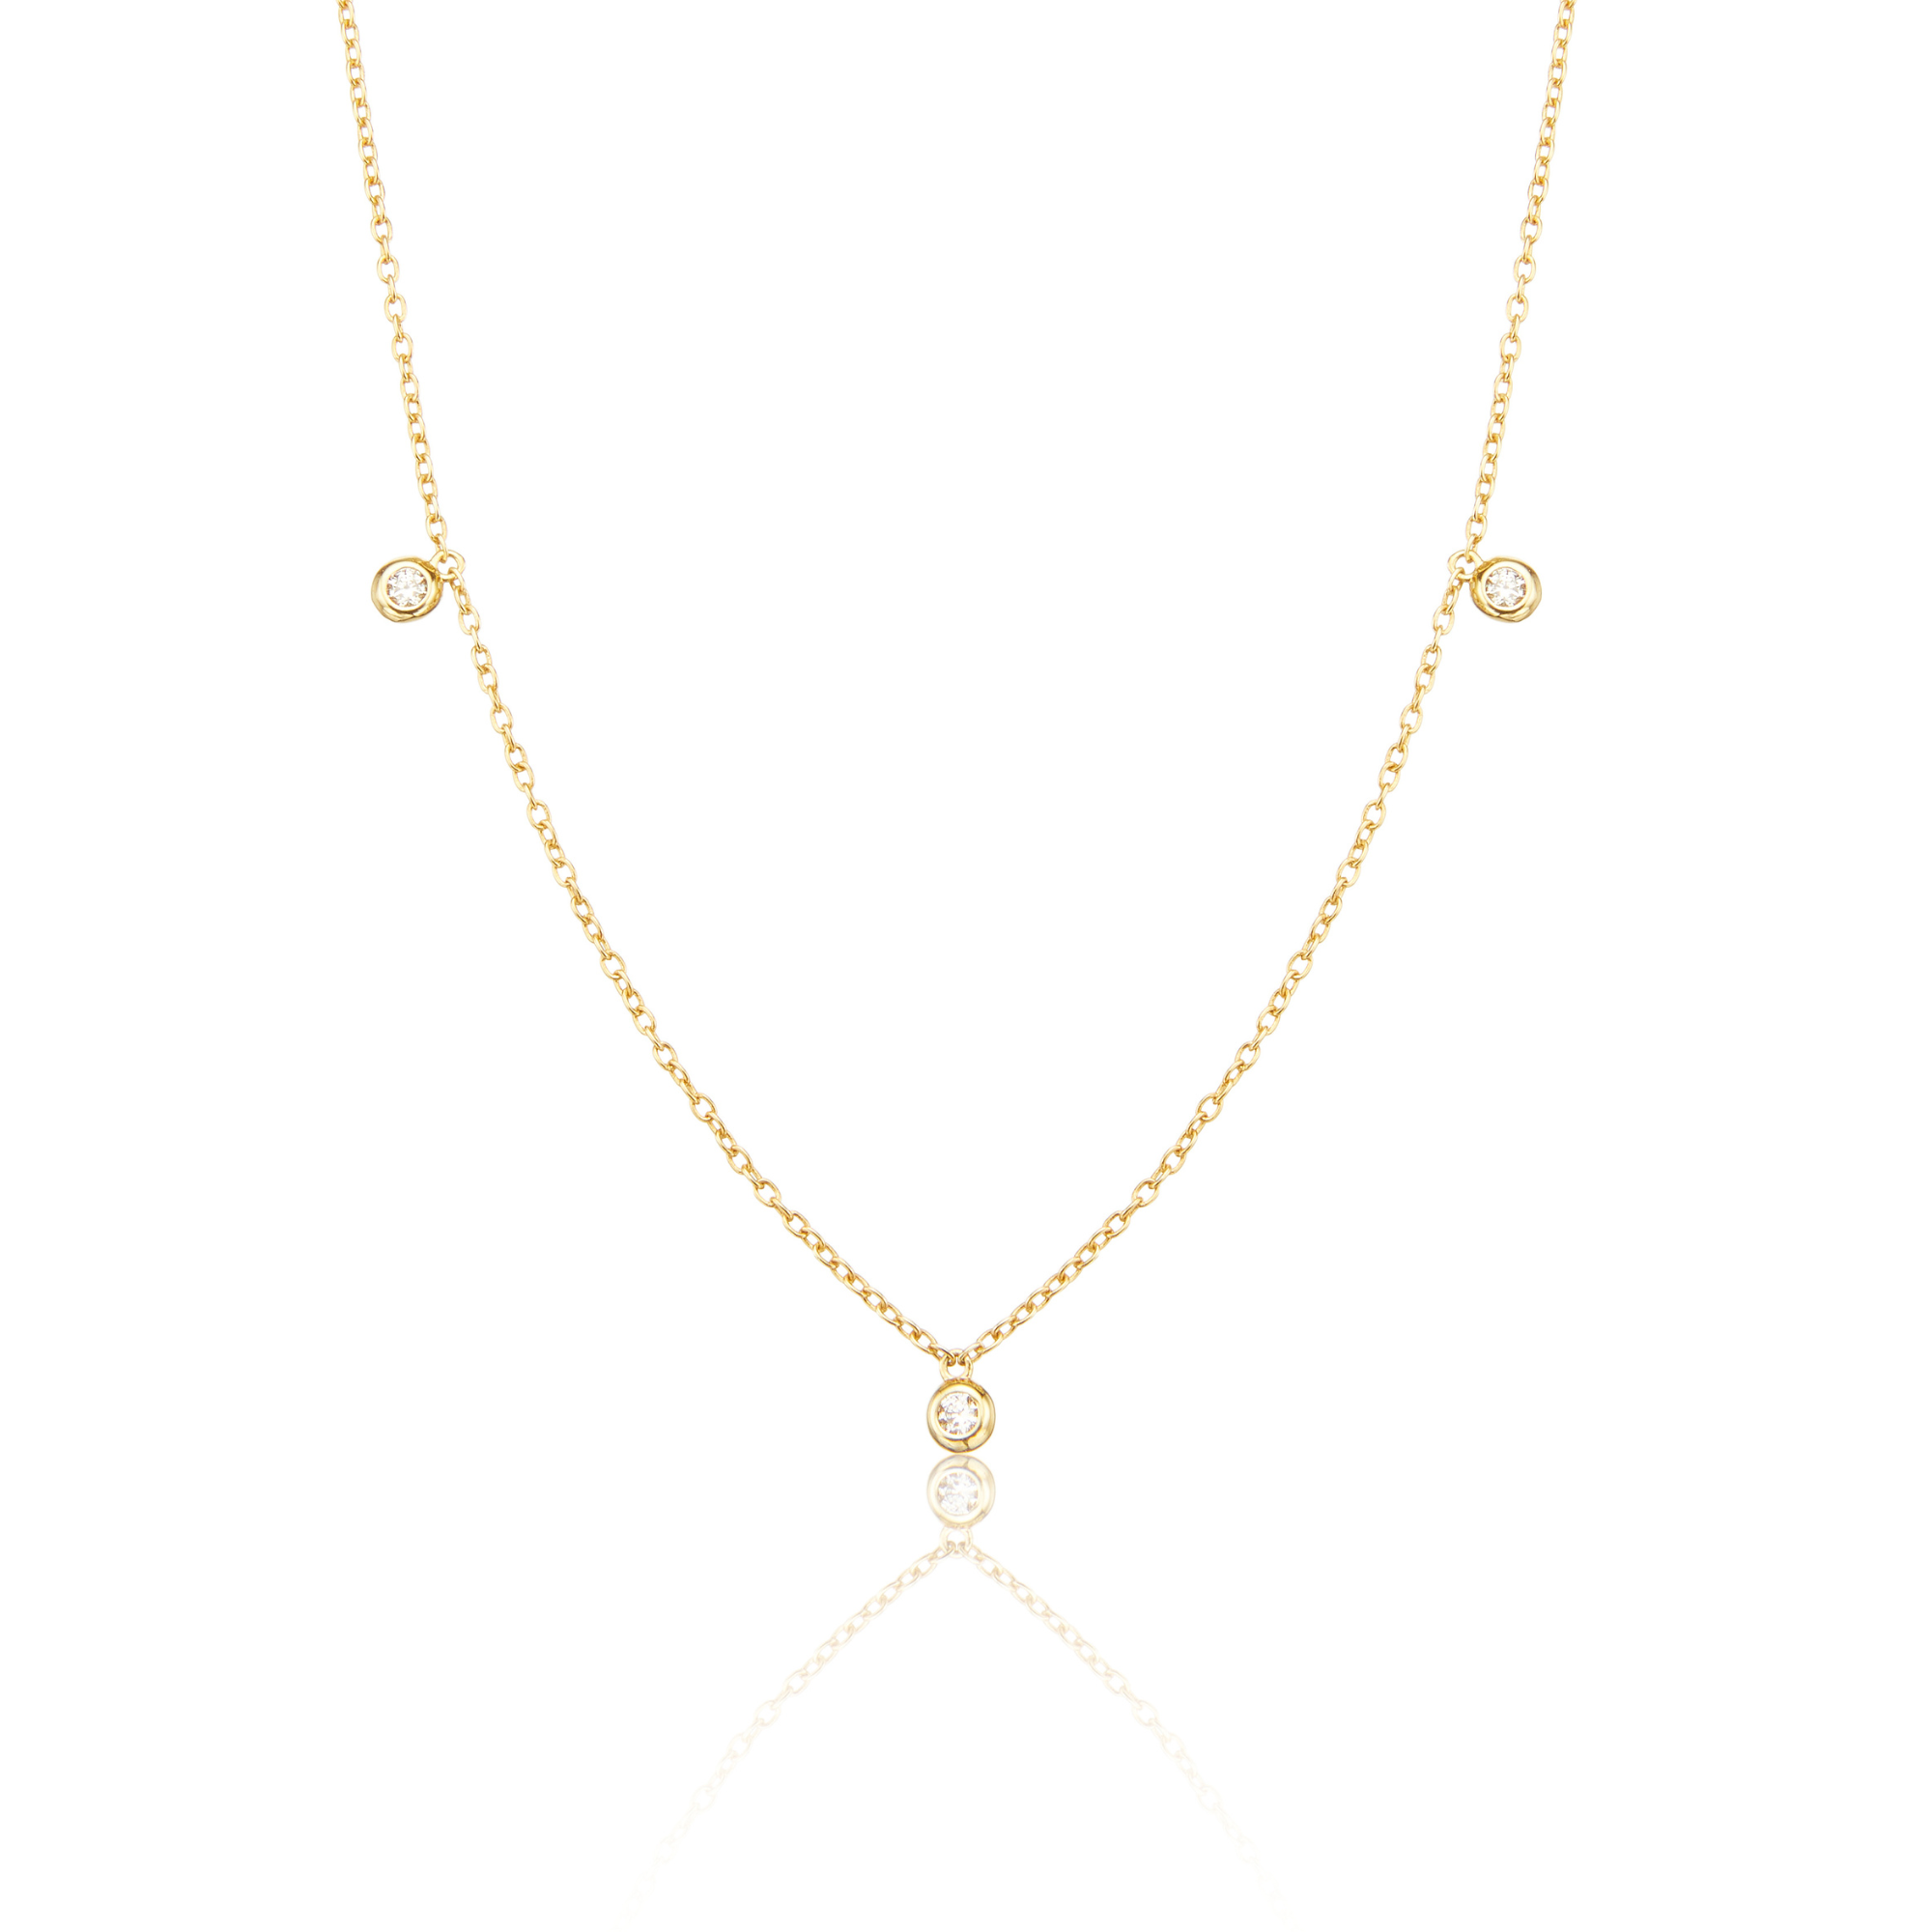 Solid gold diamond drop necklace on a white background